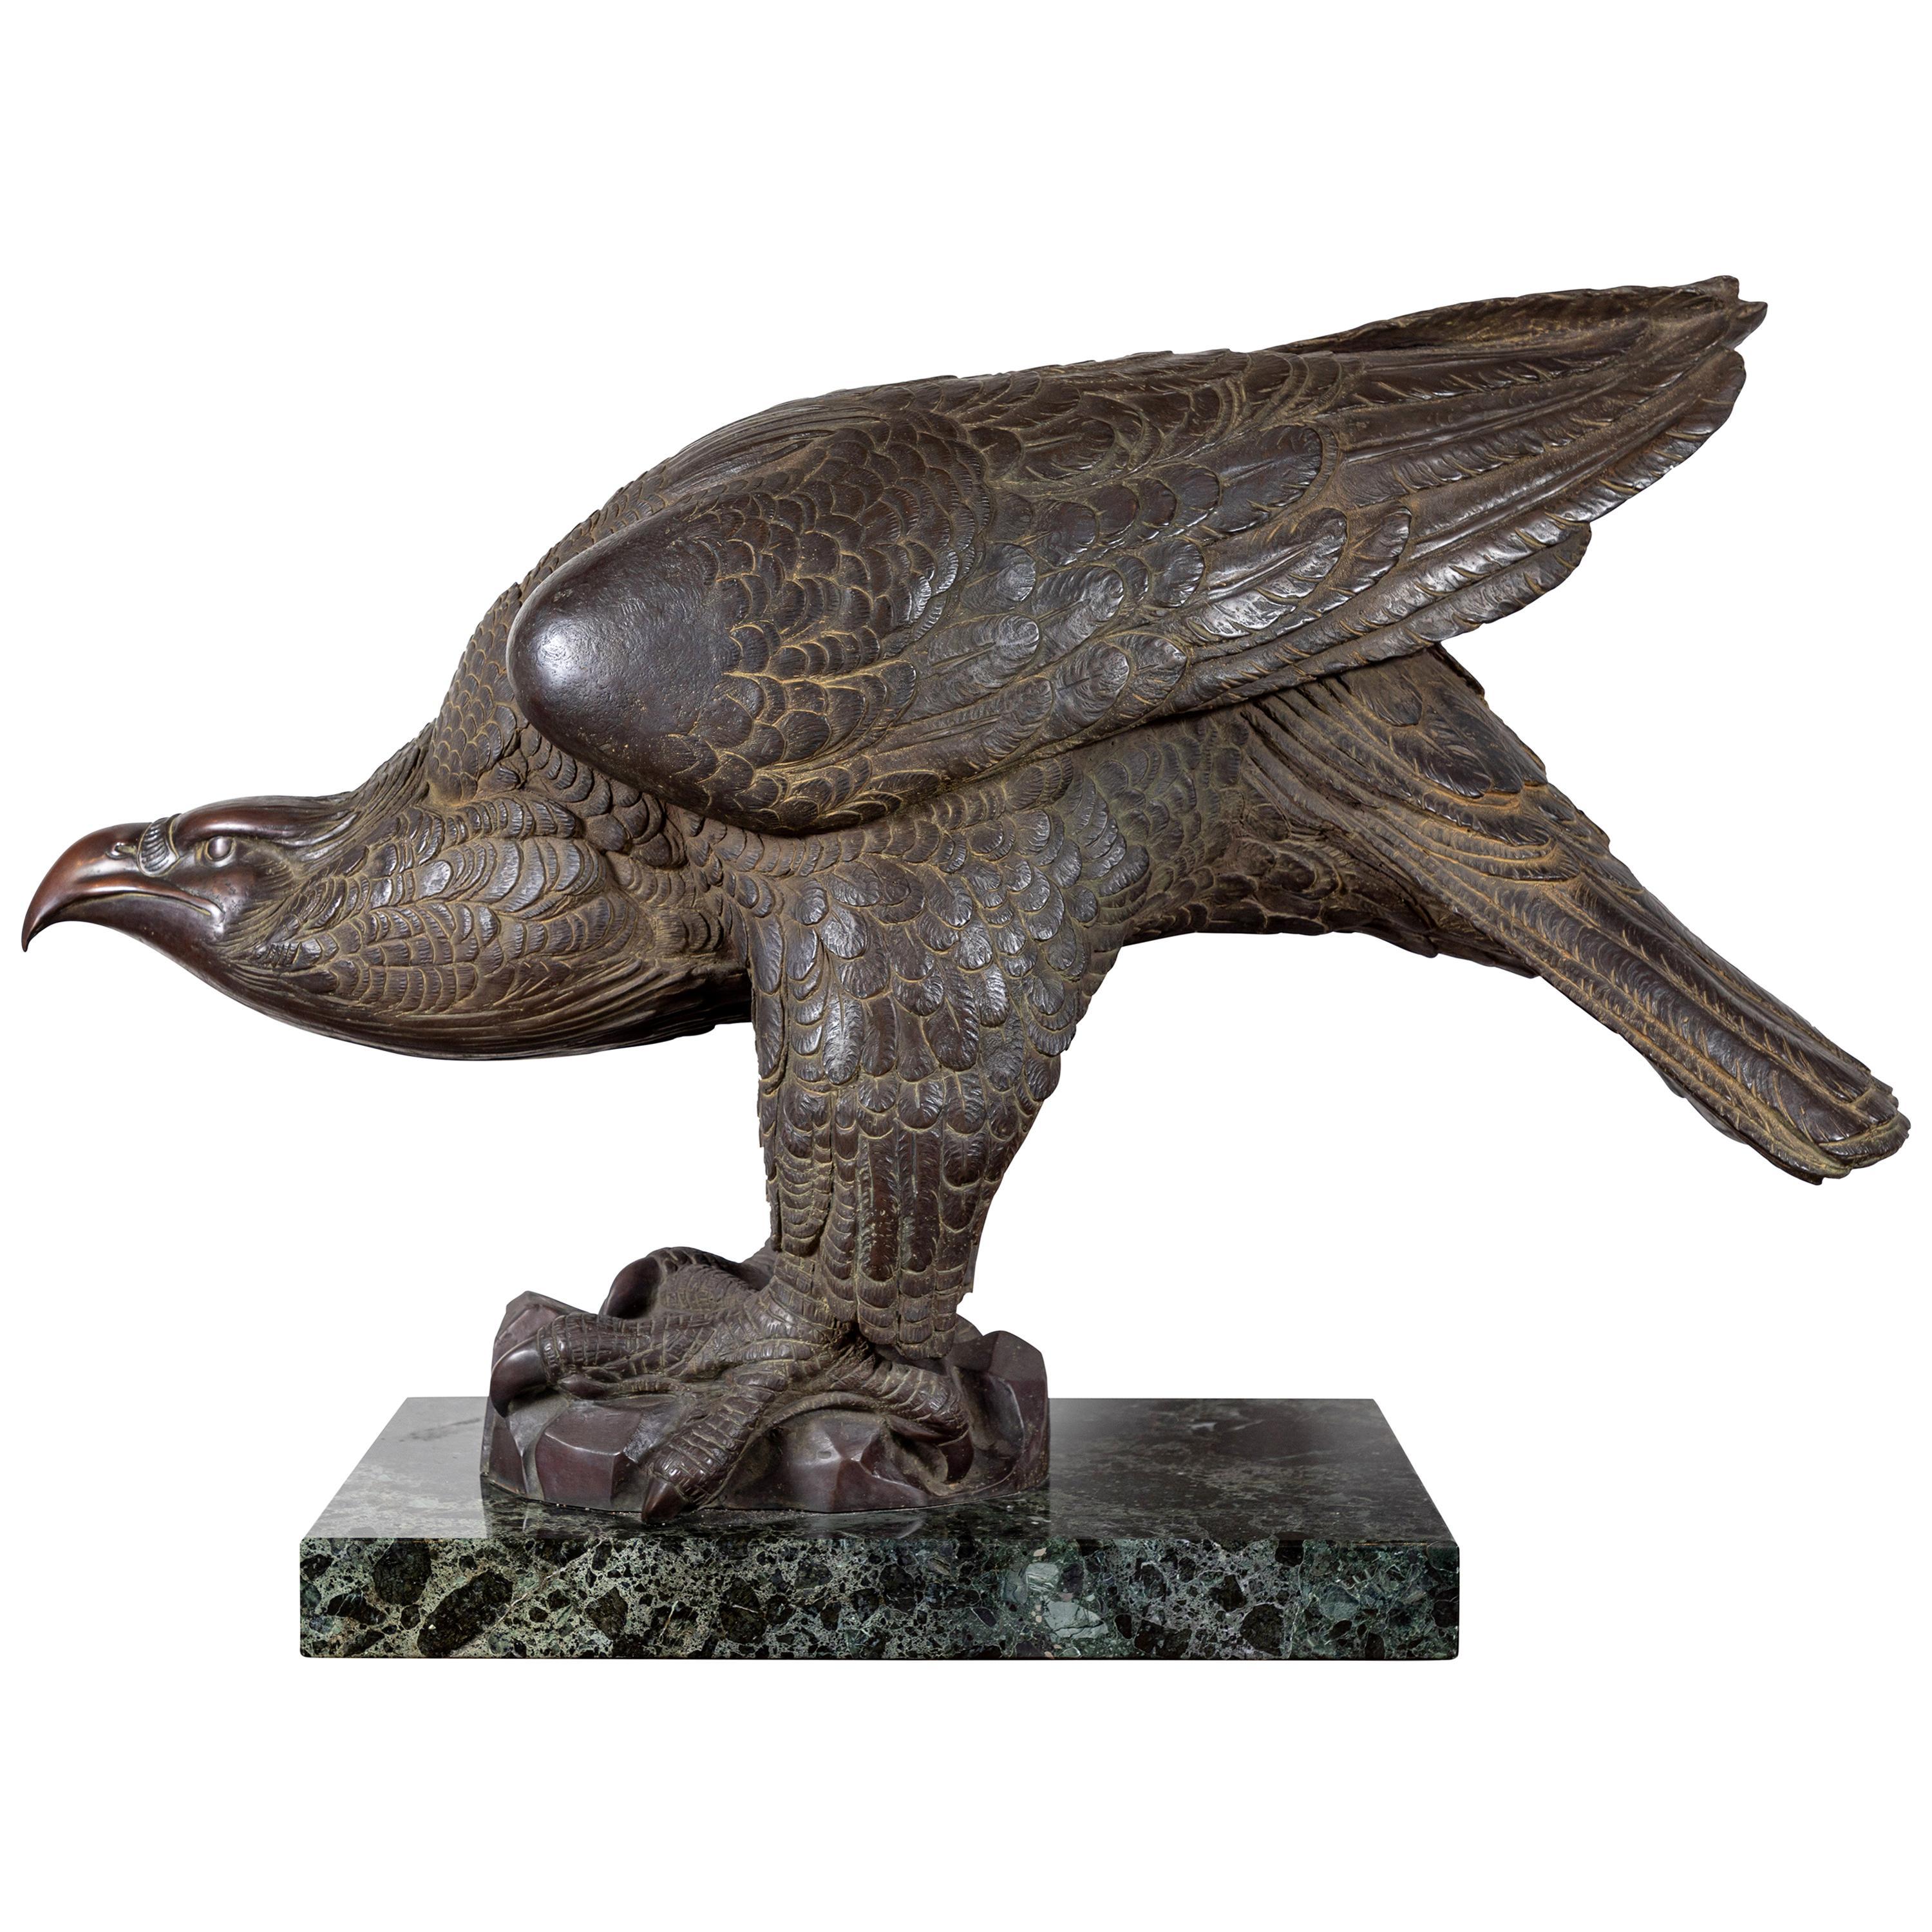 Fabulous, 1920s, detailed, cast bronze falconfrom a lost wax cast by important Italian artist, Sirio Tofanari (1886-1969). Executed by the Fonderia Artistica Ferdinando Marinelli in Florence.

Tofanari is recognized as one of the foremost sculptors